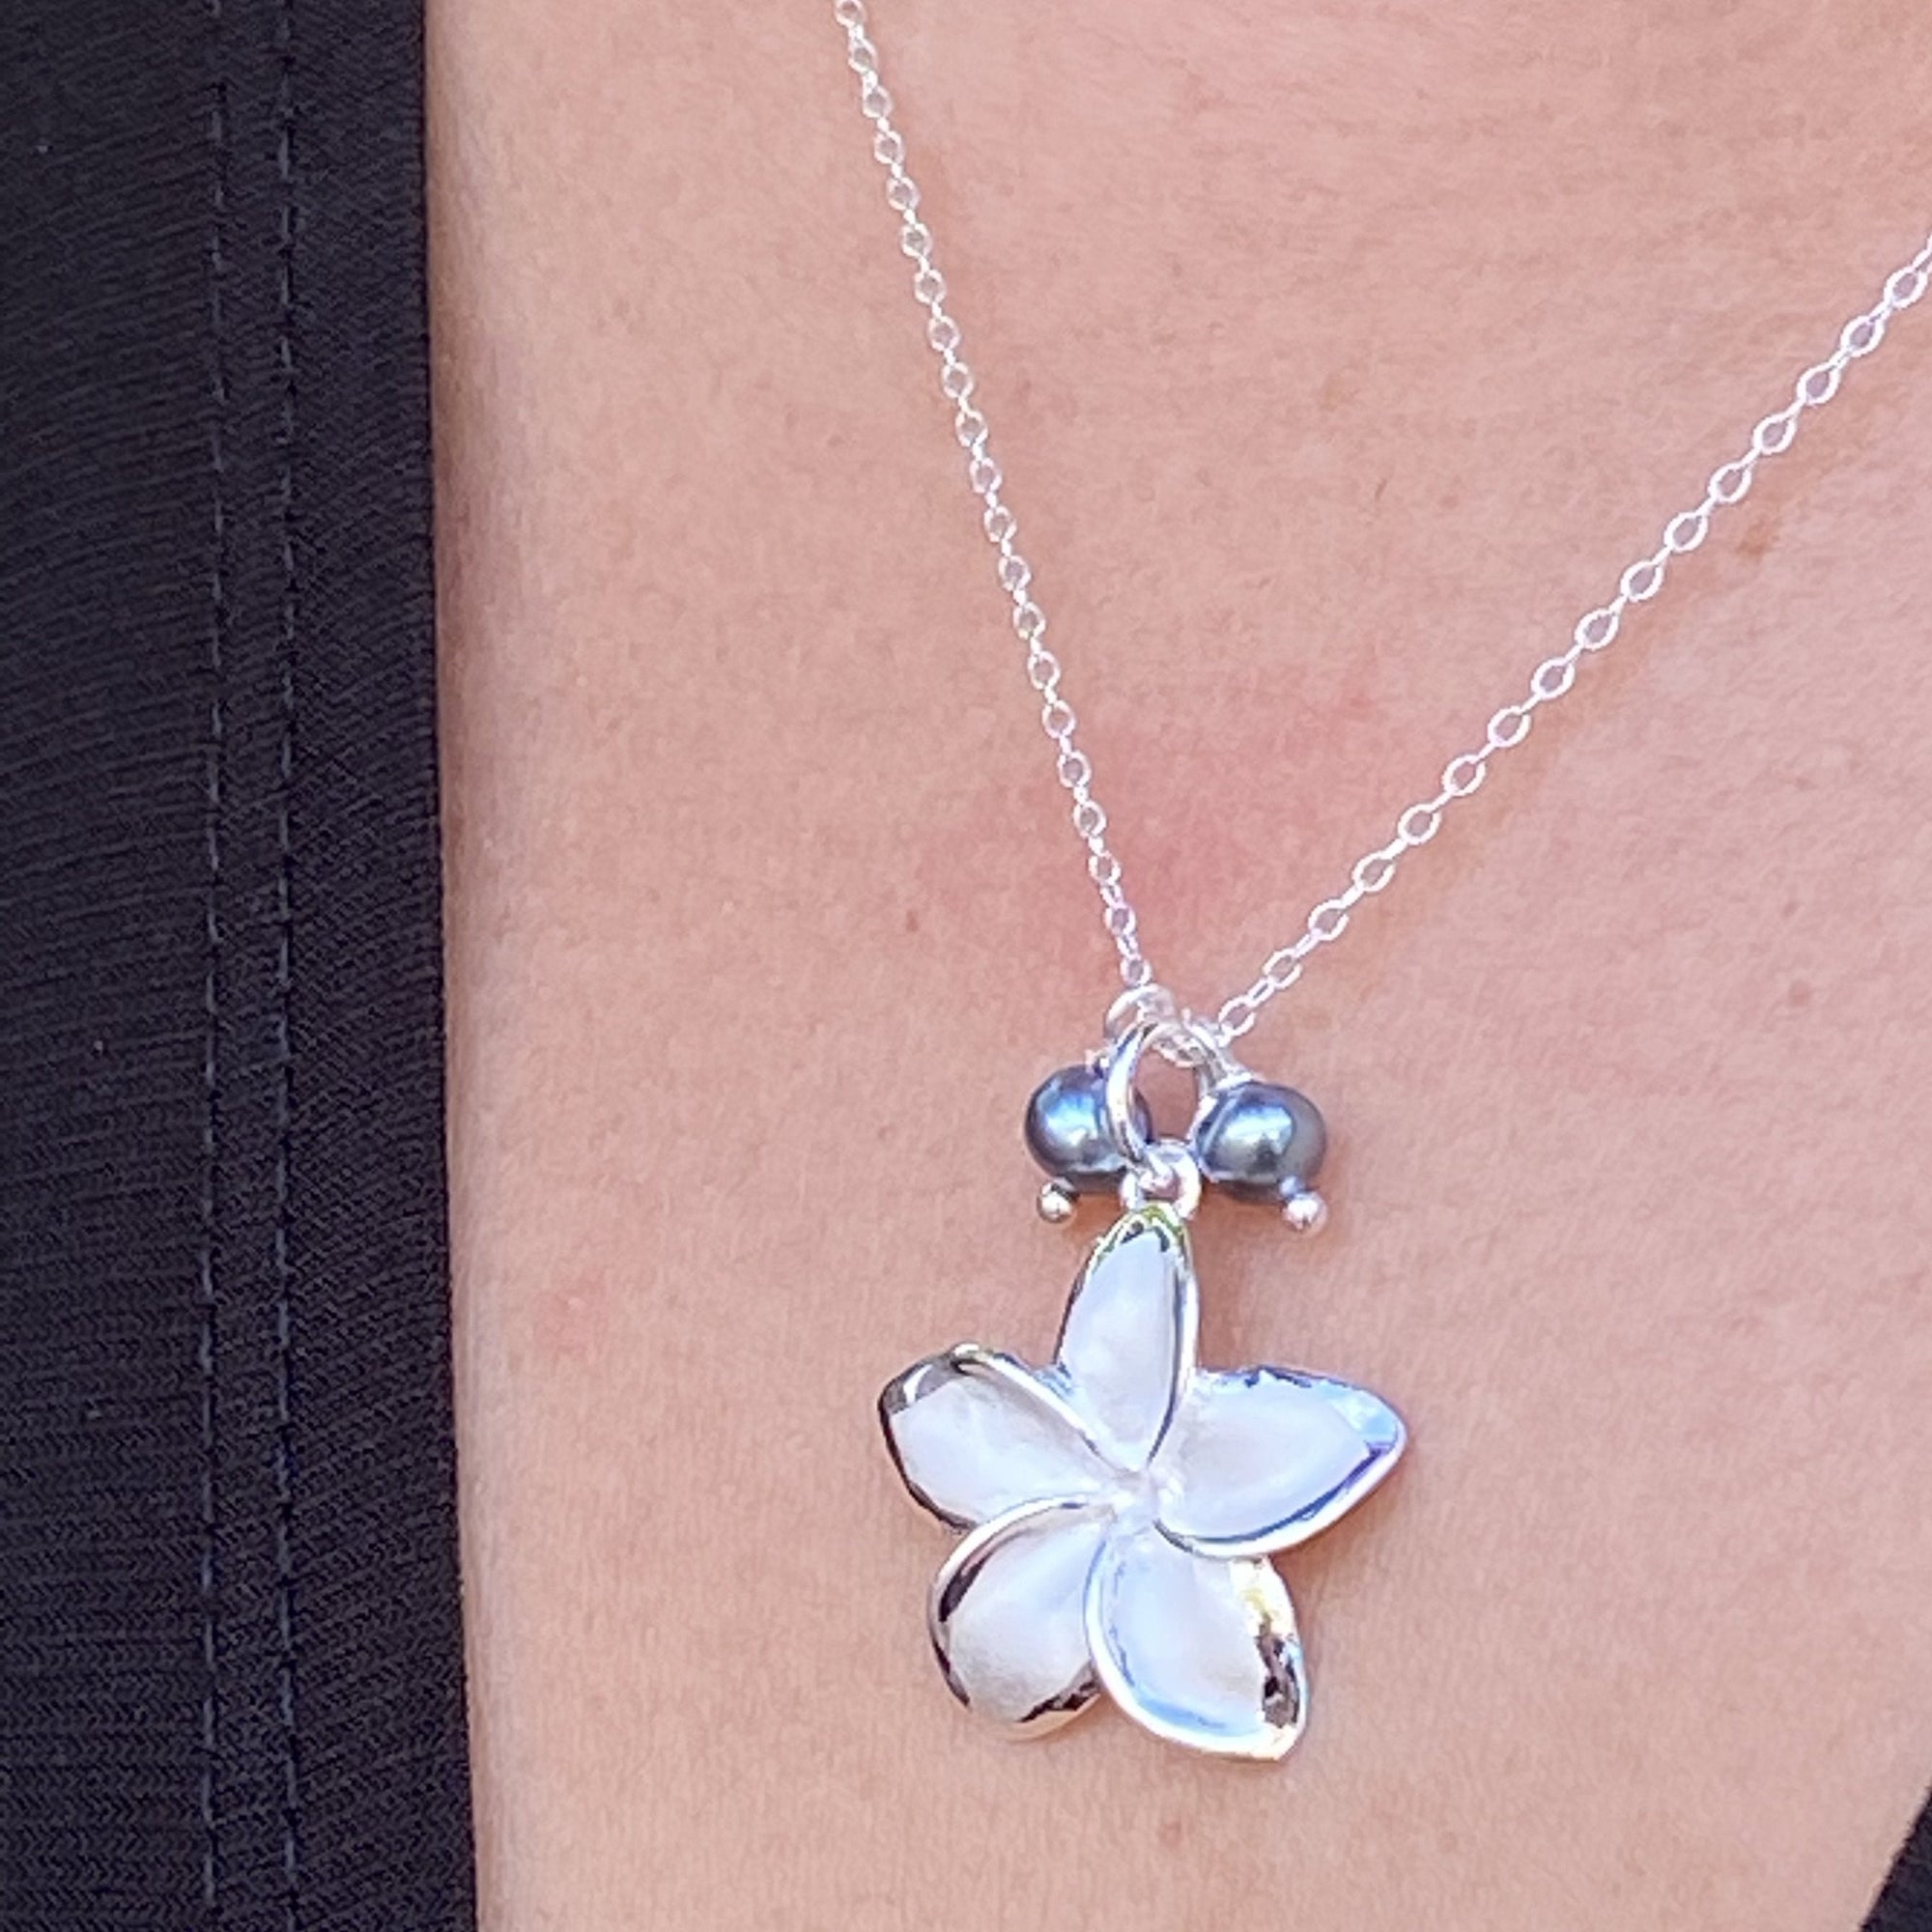 Pop-Up Mākeke - Stacey Lee Designs - Plumeria Necklace - Peacock Freshwater Pearls - In Use